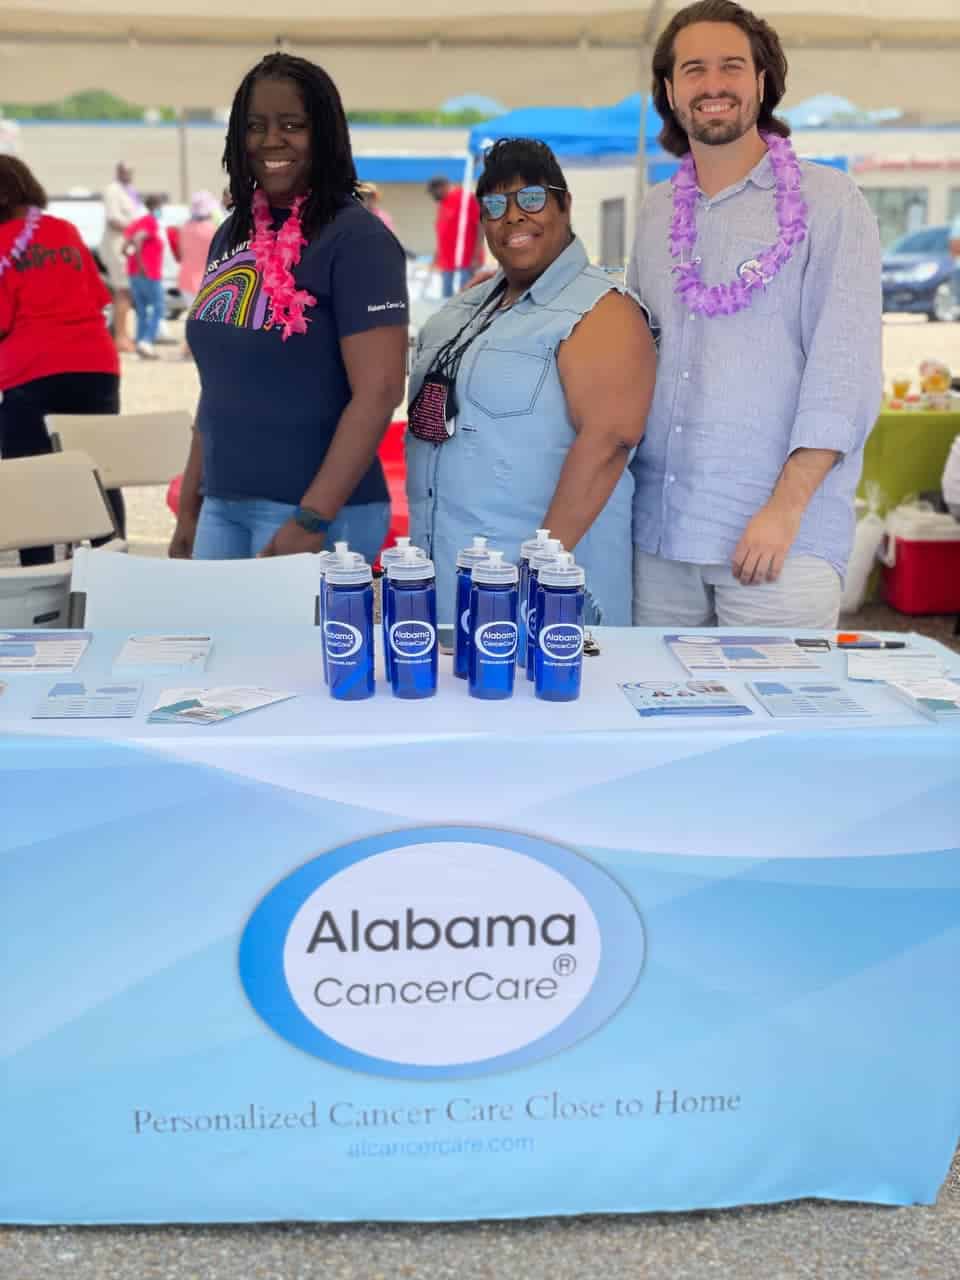 3 Alabama cancer care employees smile behind a vendor booth in Selma